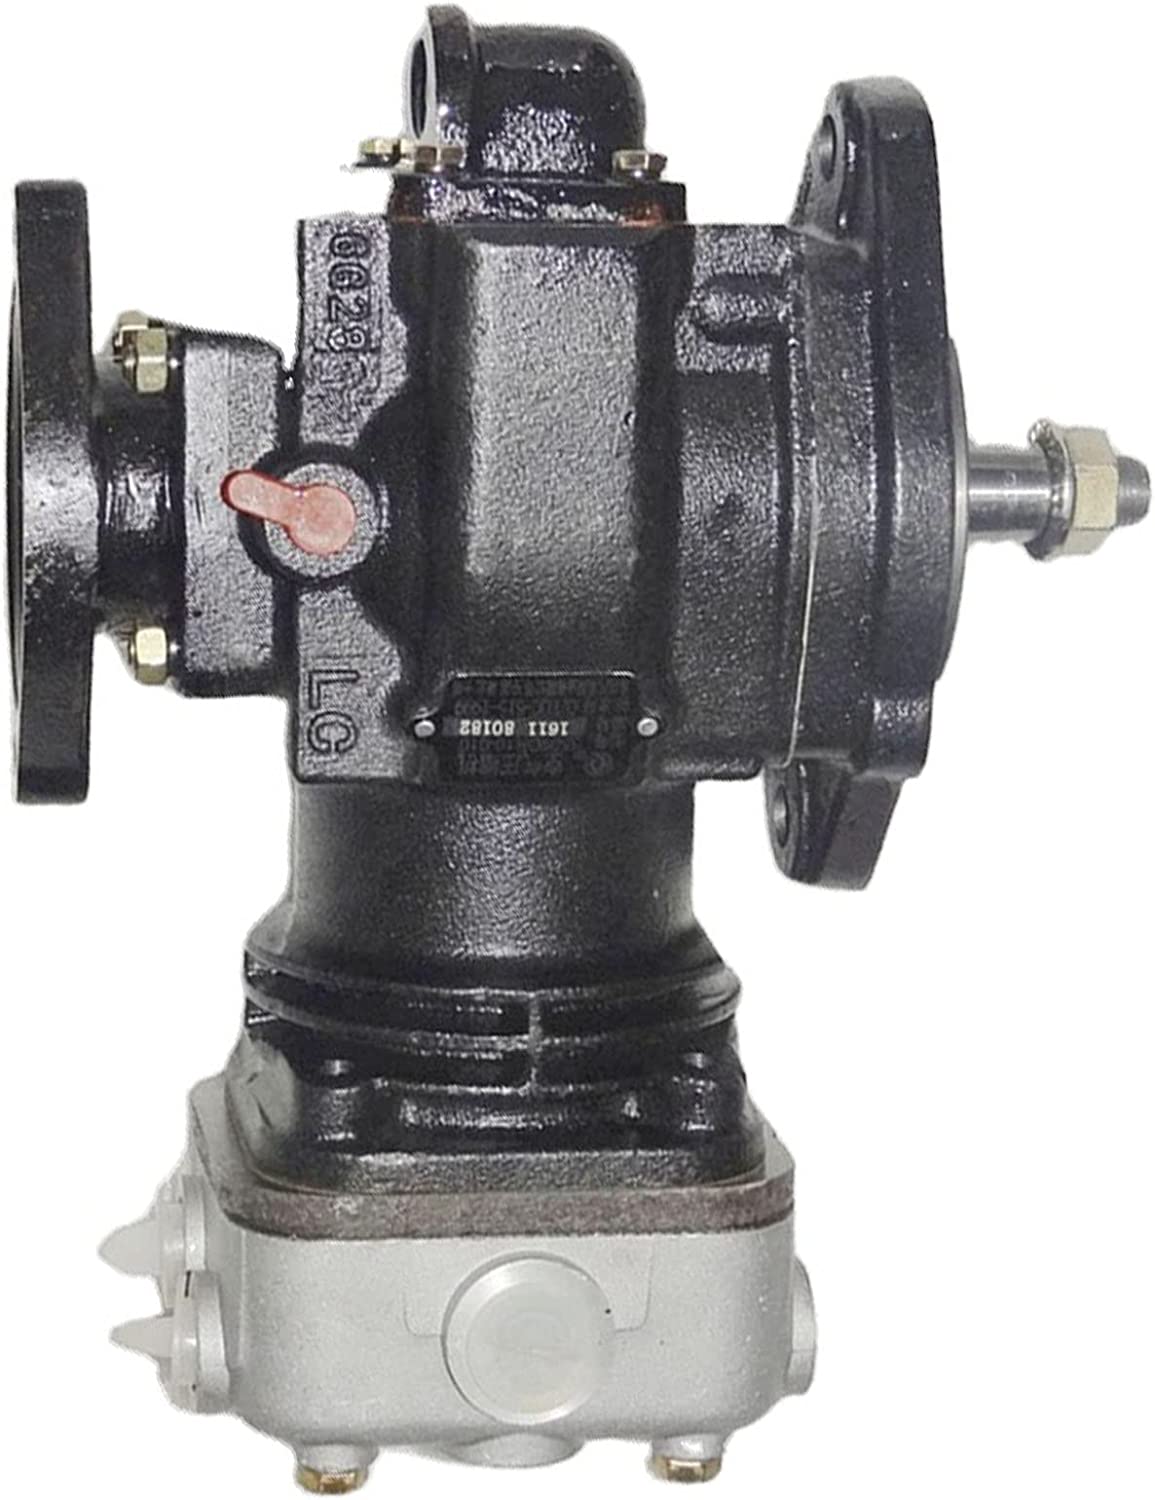 Seapple New Air Compressor Pump 3974548 A3974548 Compatible with Cummins 210/160 6BT 5.9L Diesel Engine - image 1 of 6